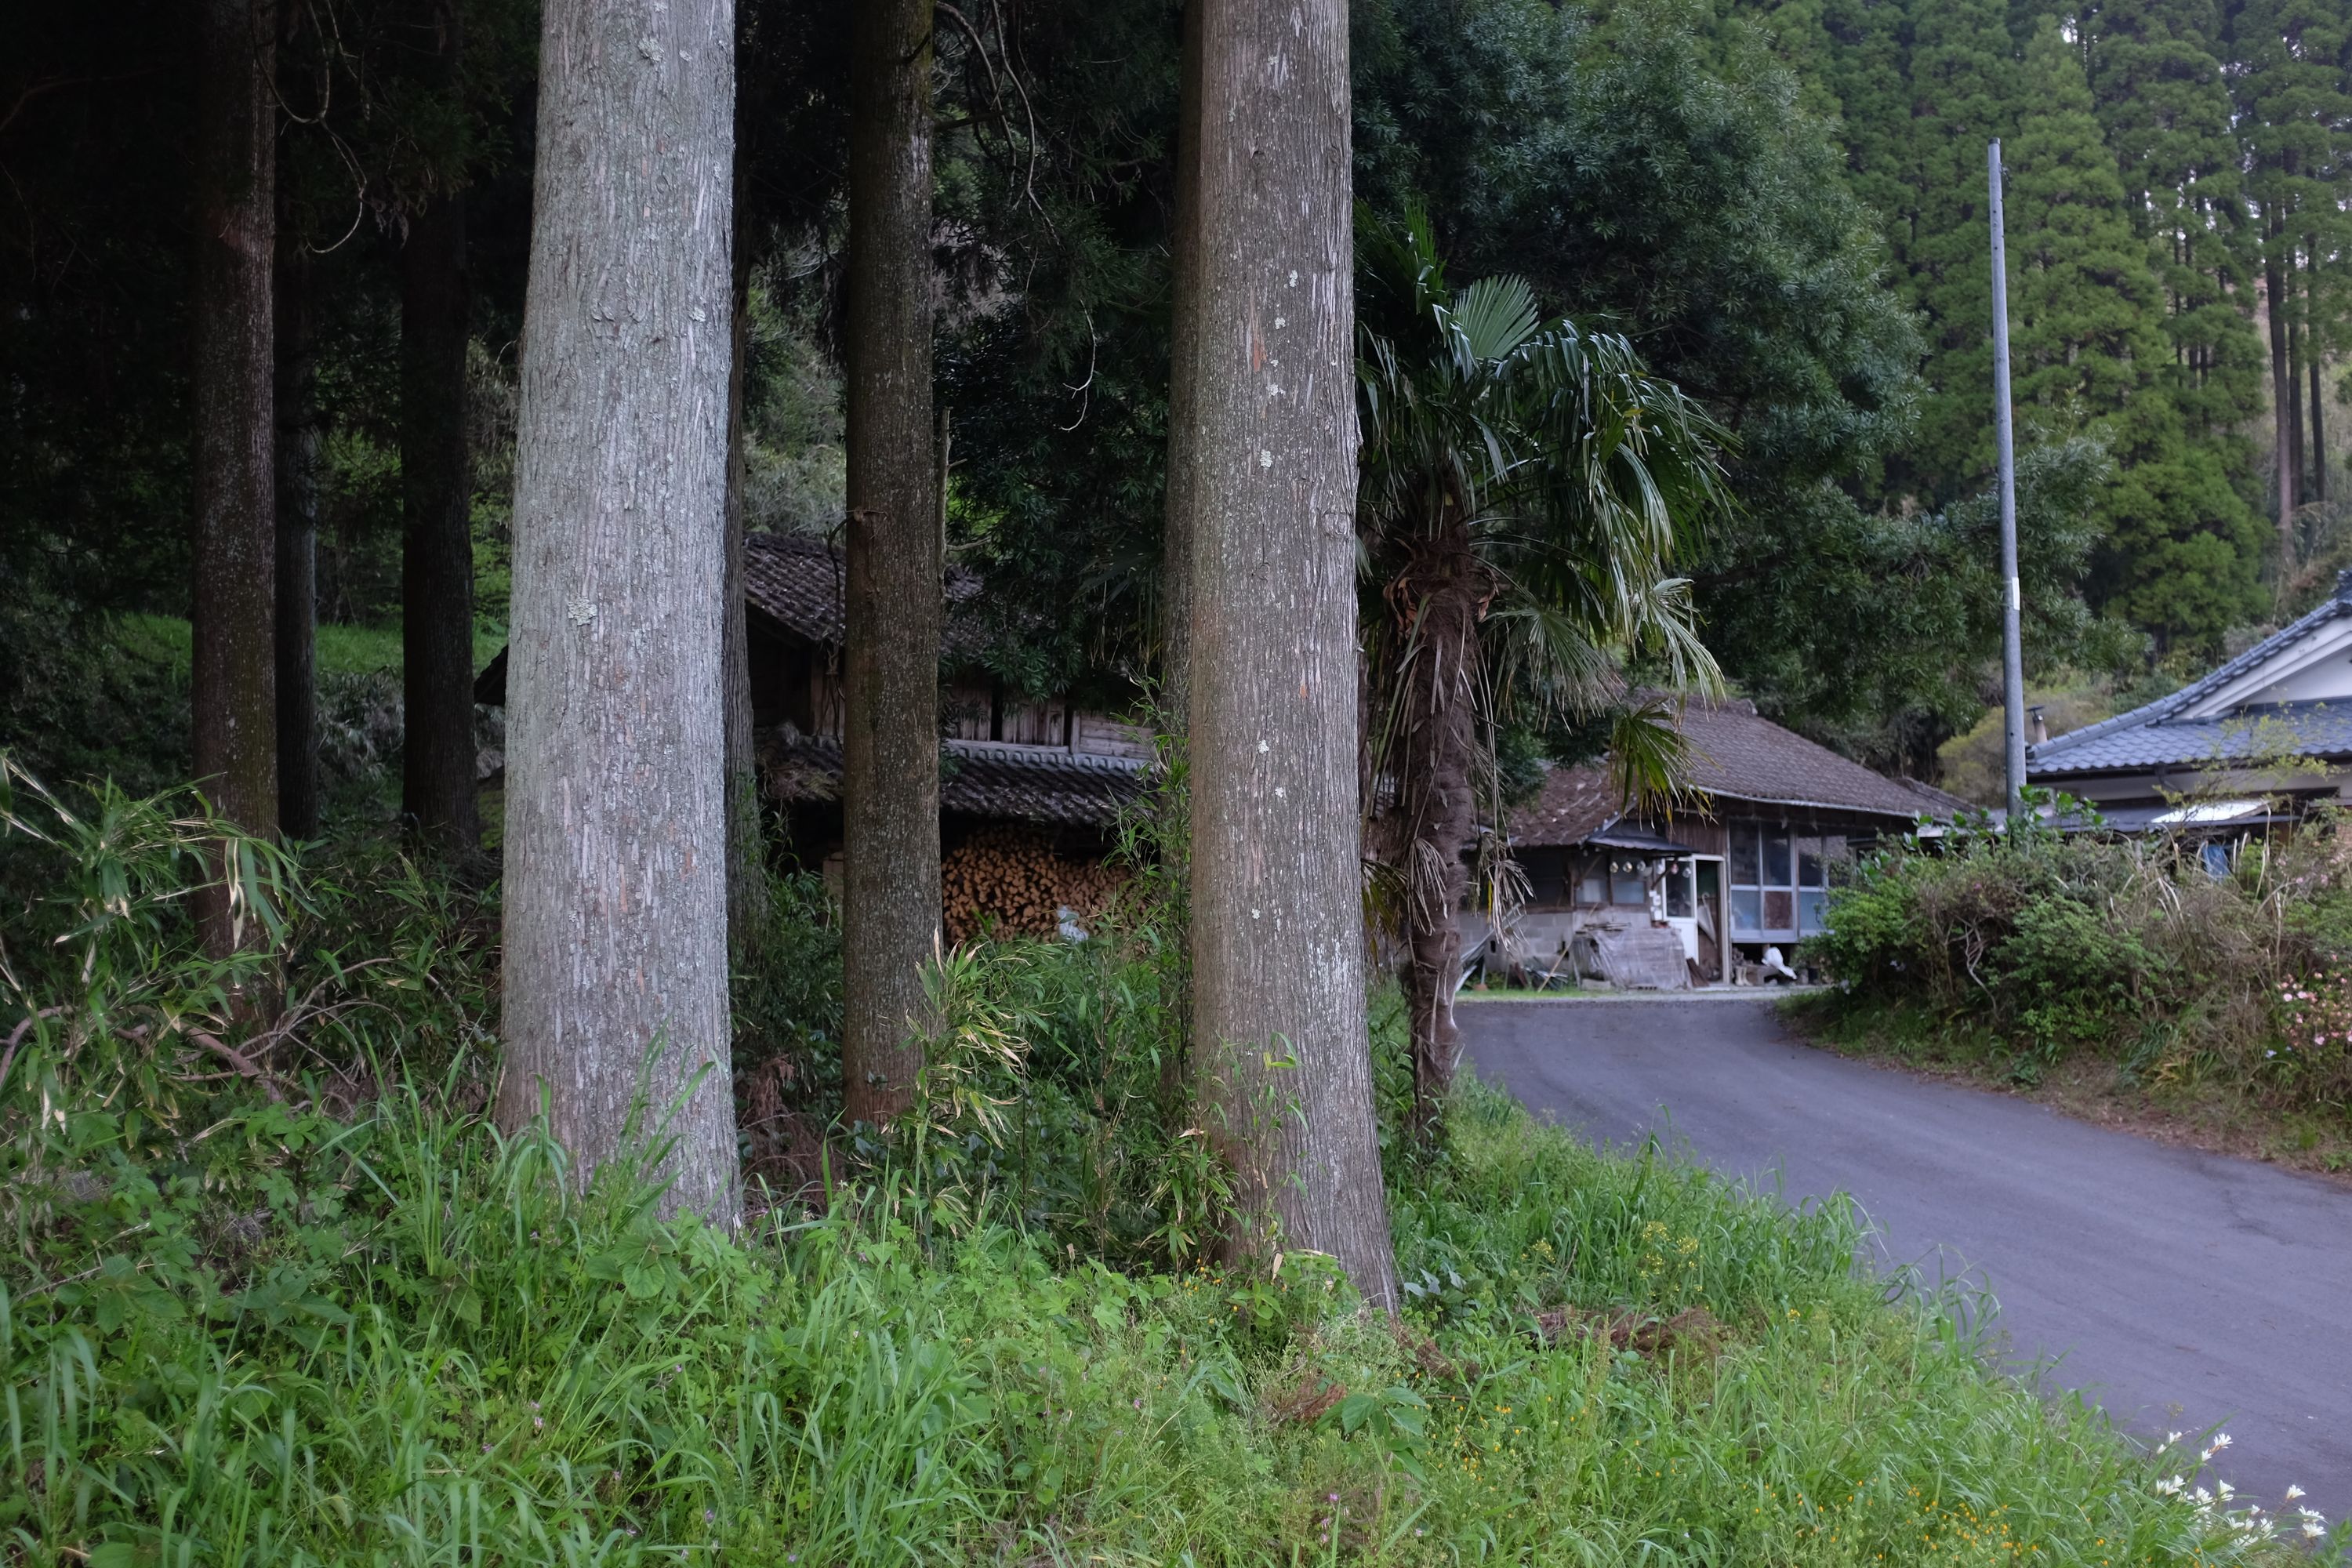 A Japanese house in a forest at the edge of a narrow road.